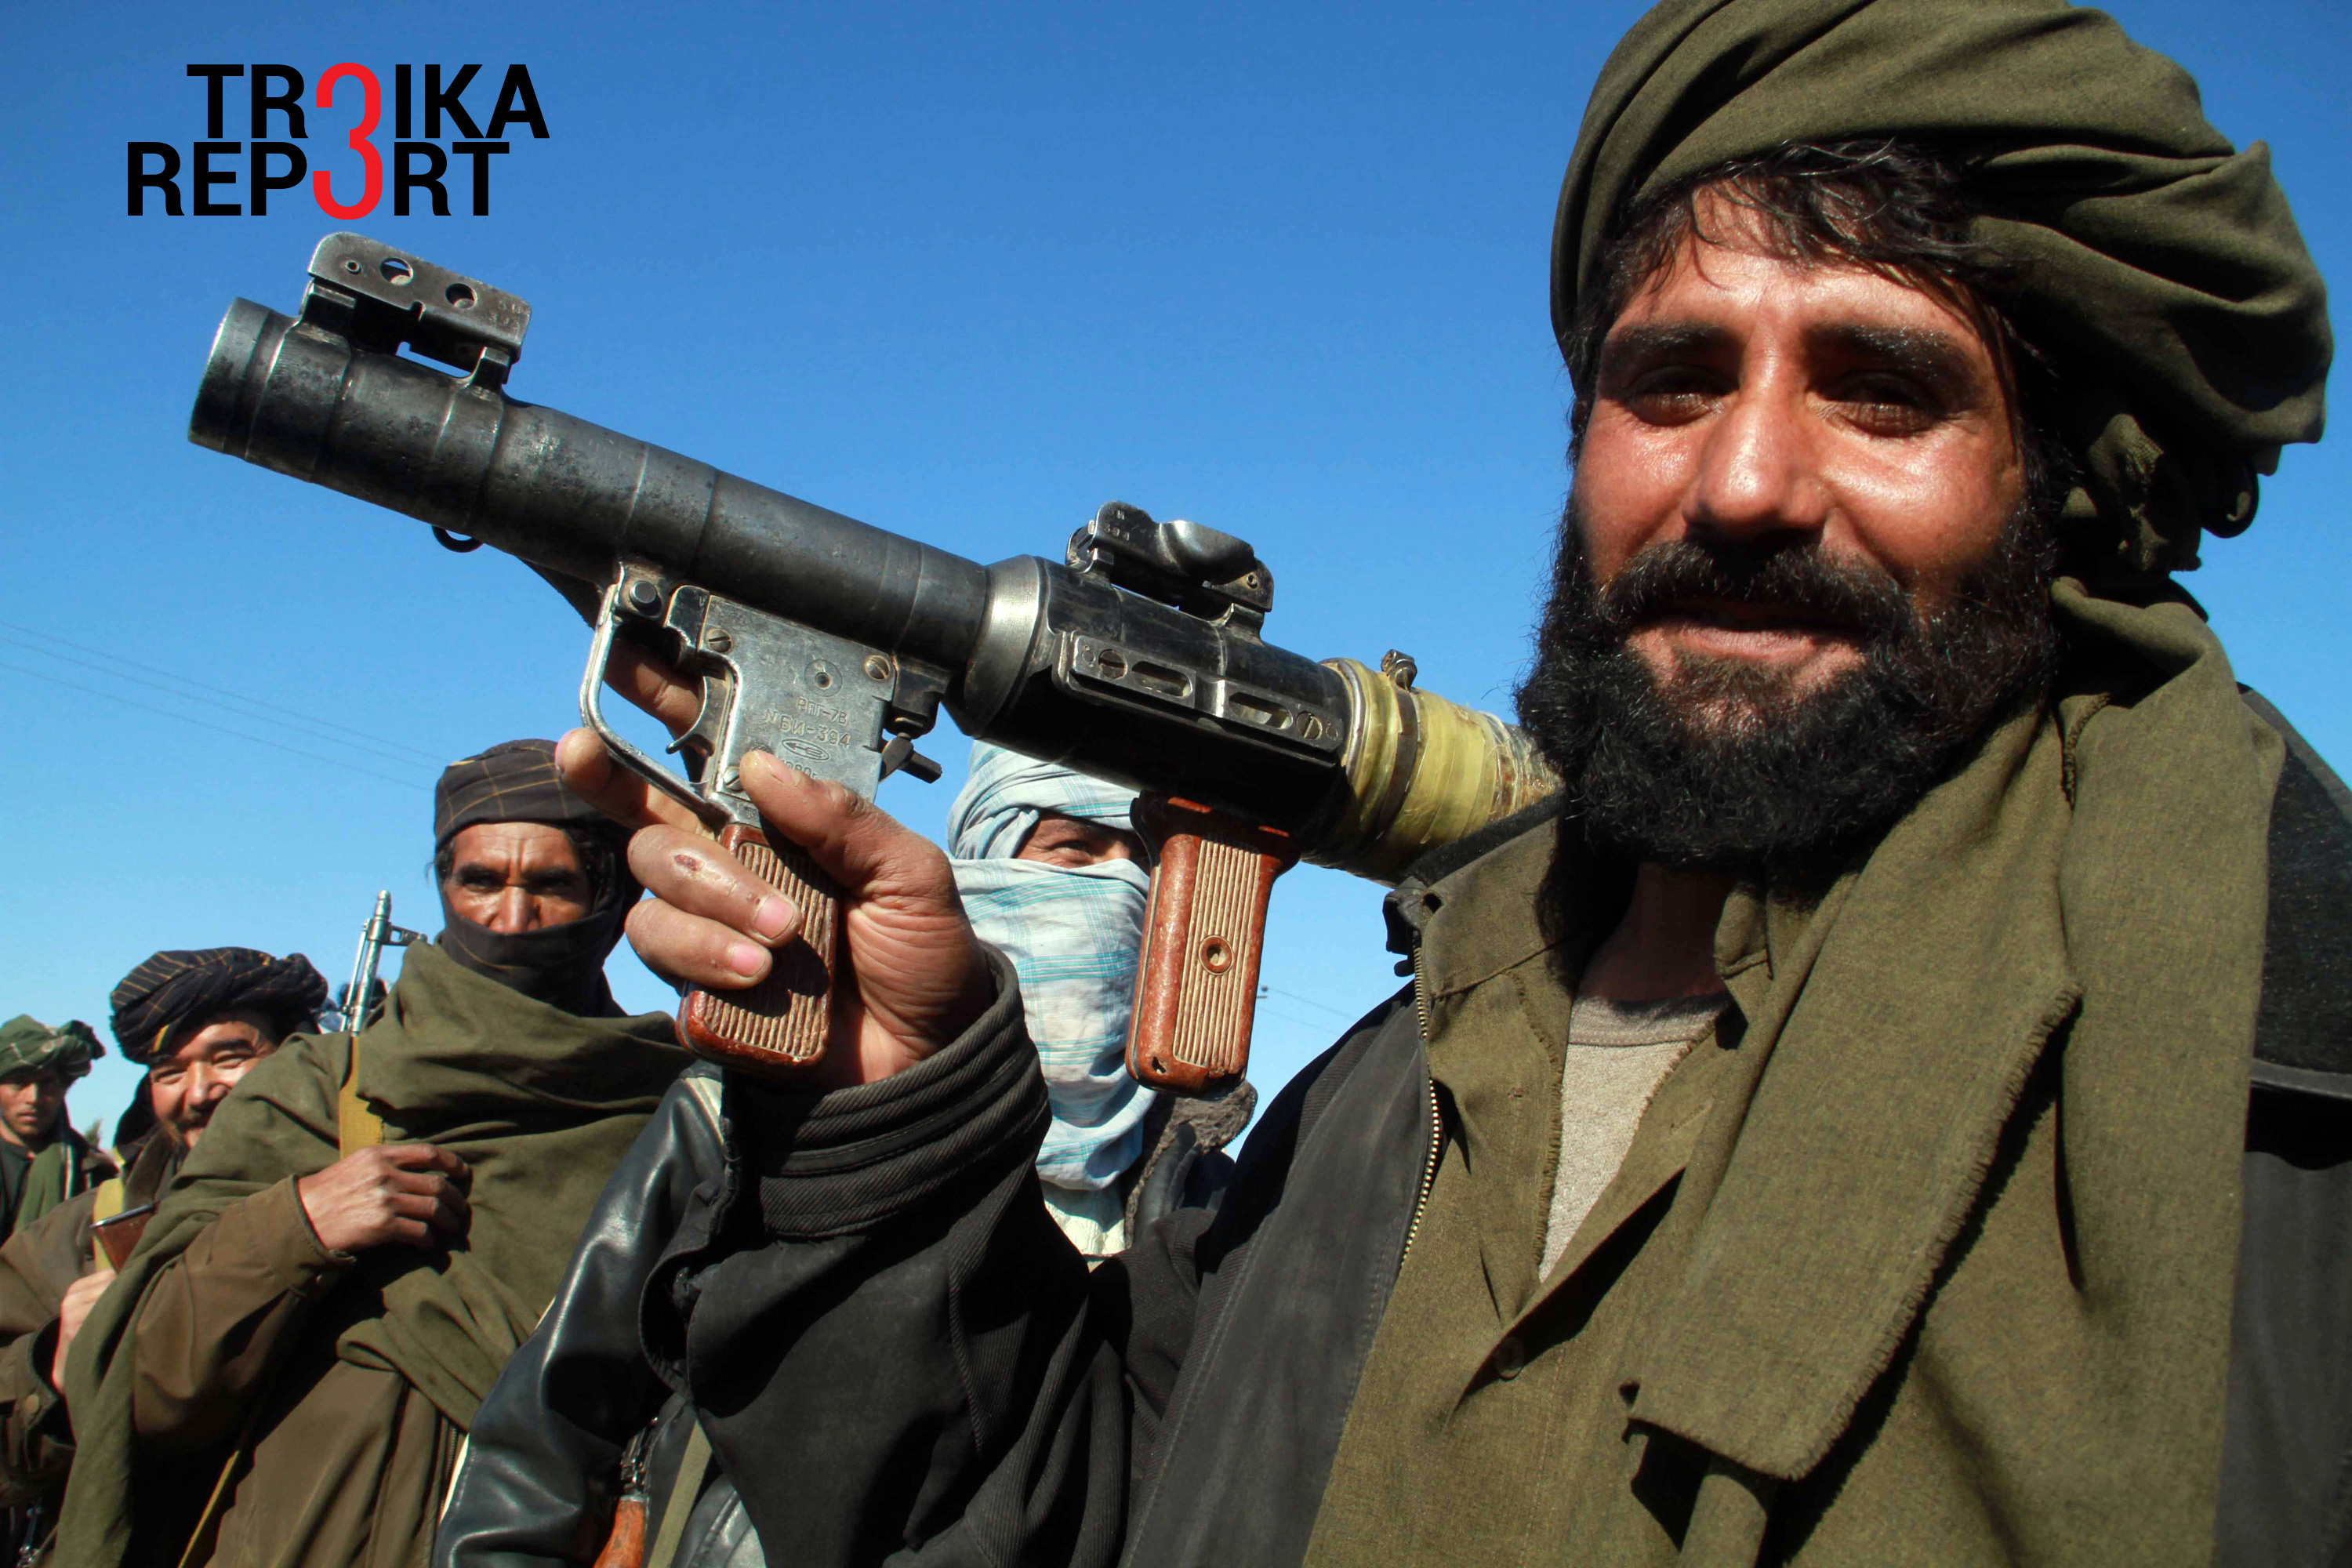 A Taliban militant poses for a picture after joining the Afghan government's reconciliation and reintegration programme, in Herat January 30, 2012. Some thirty Afghan Taliban have joined the program, Herat governor Daoud Shah said.